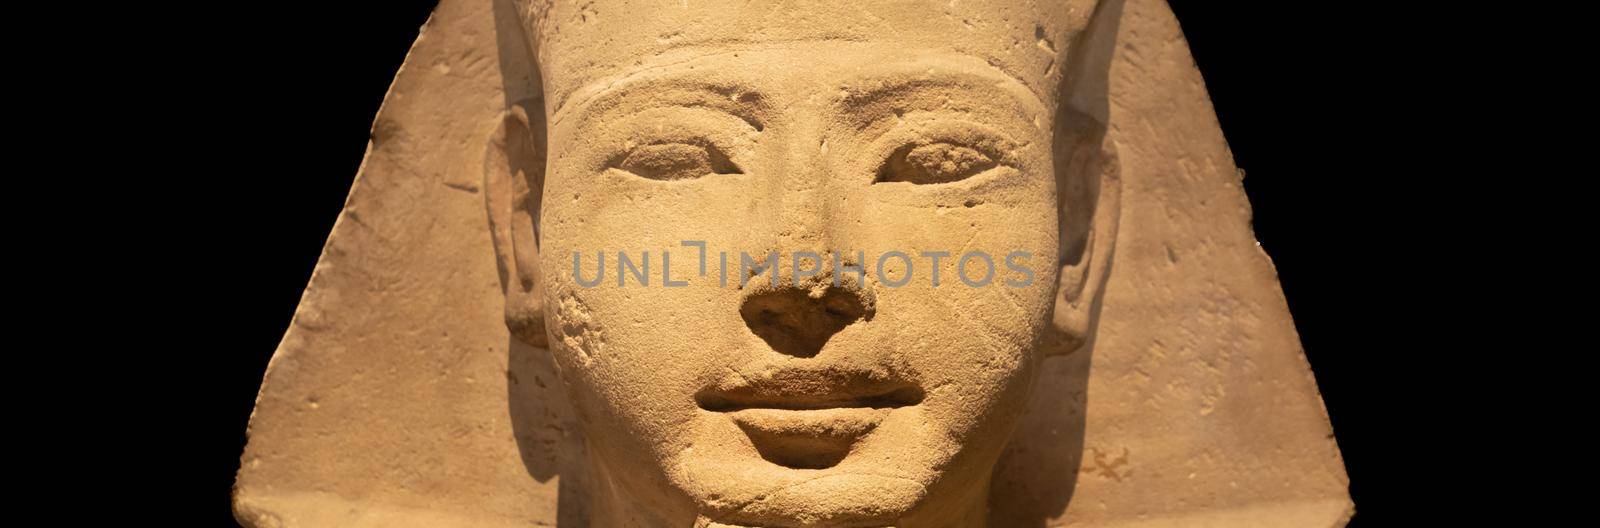 Egyptian archaeology. Ancient Sphinx in sandstone representing the pharaoh, copy space. by Perseomedusa